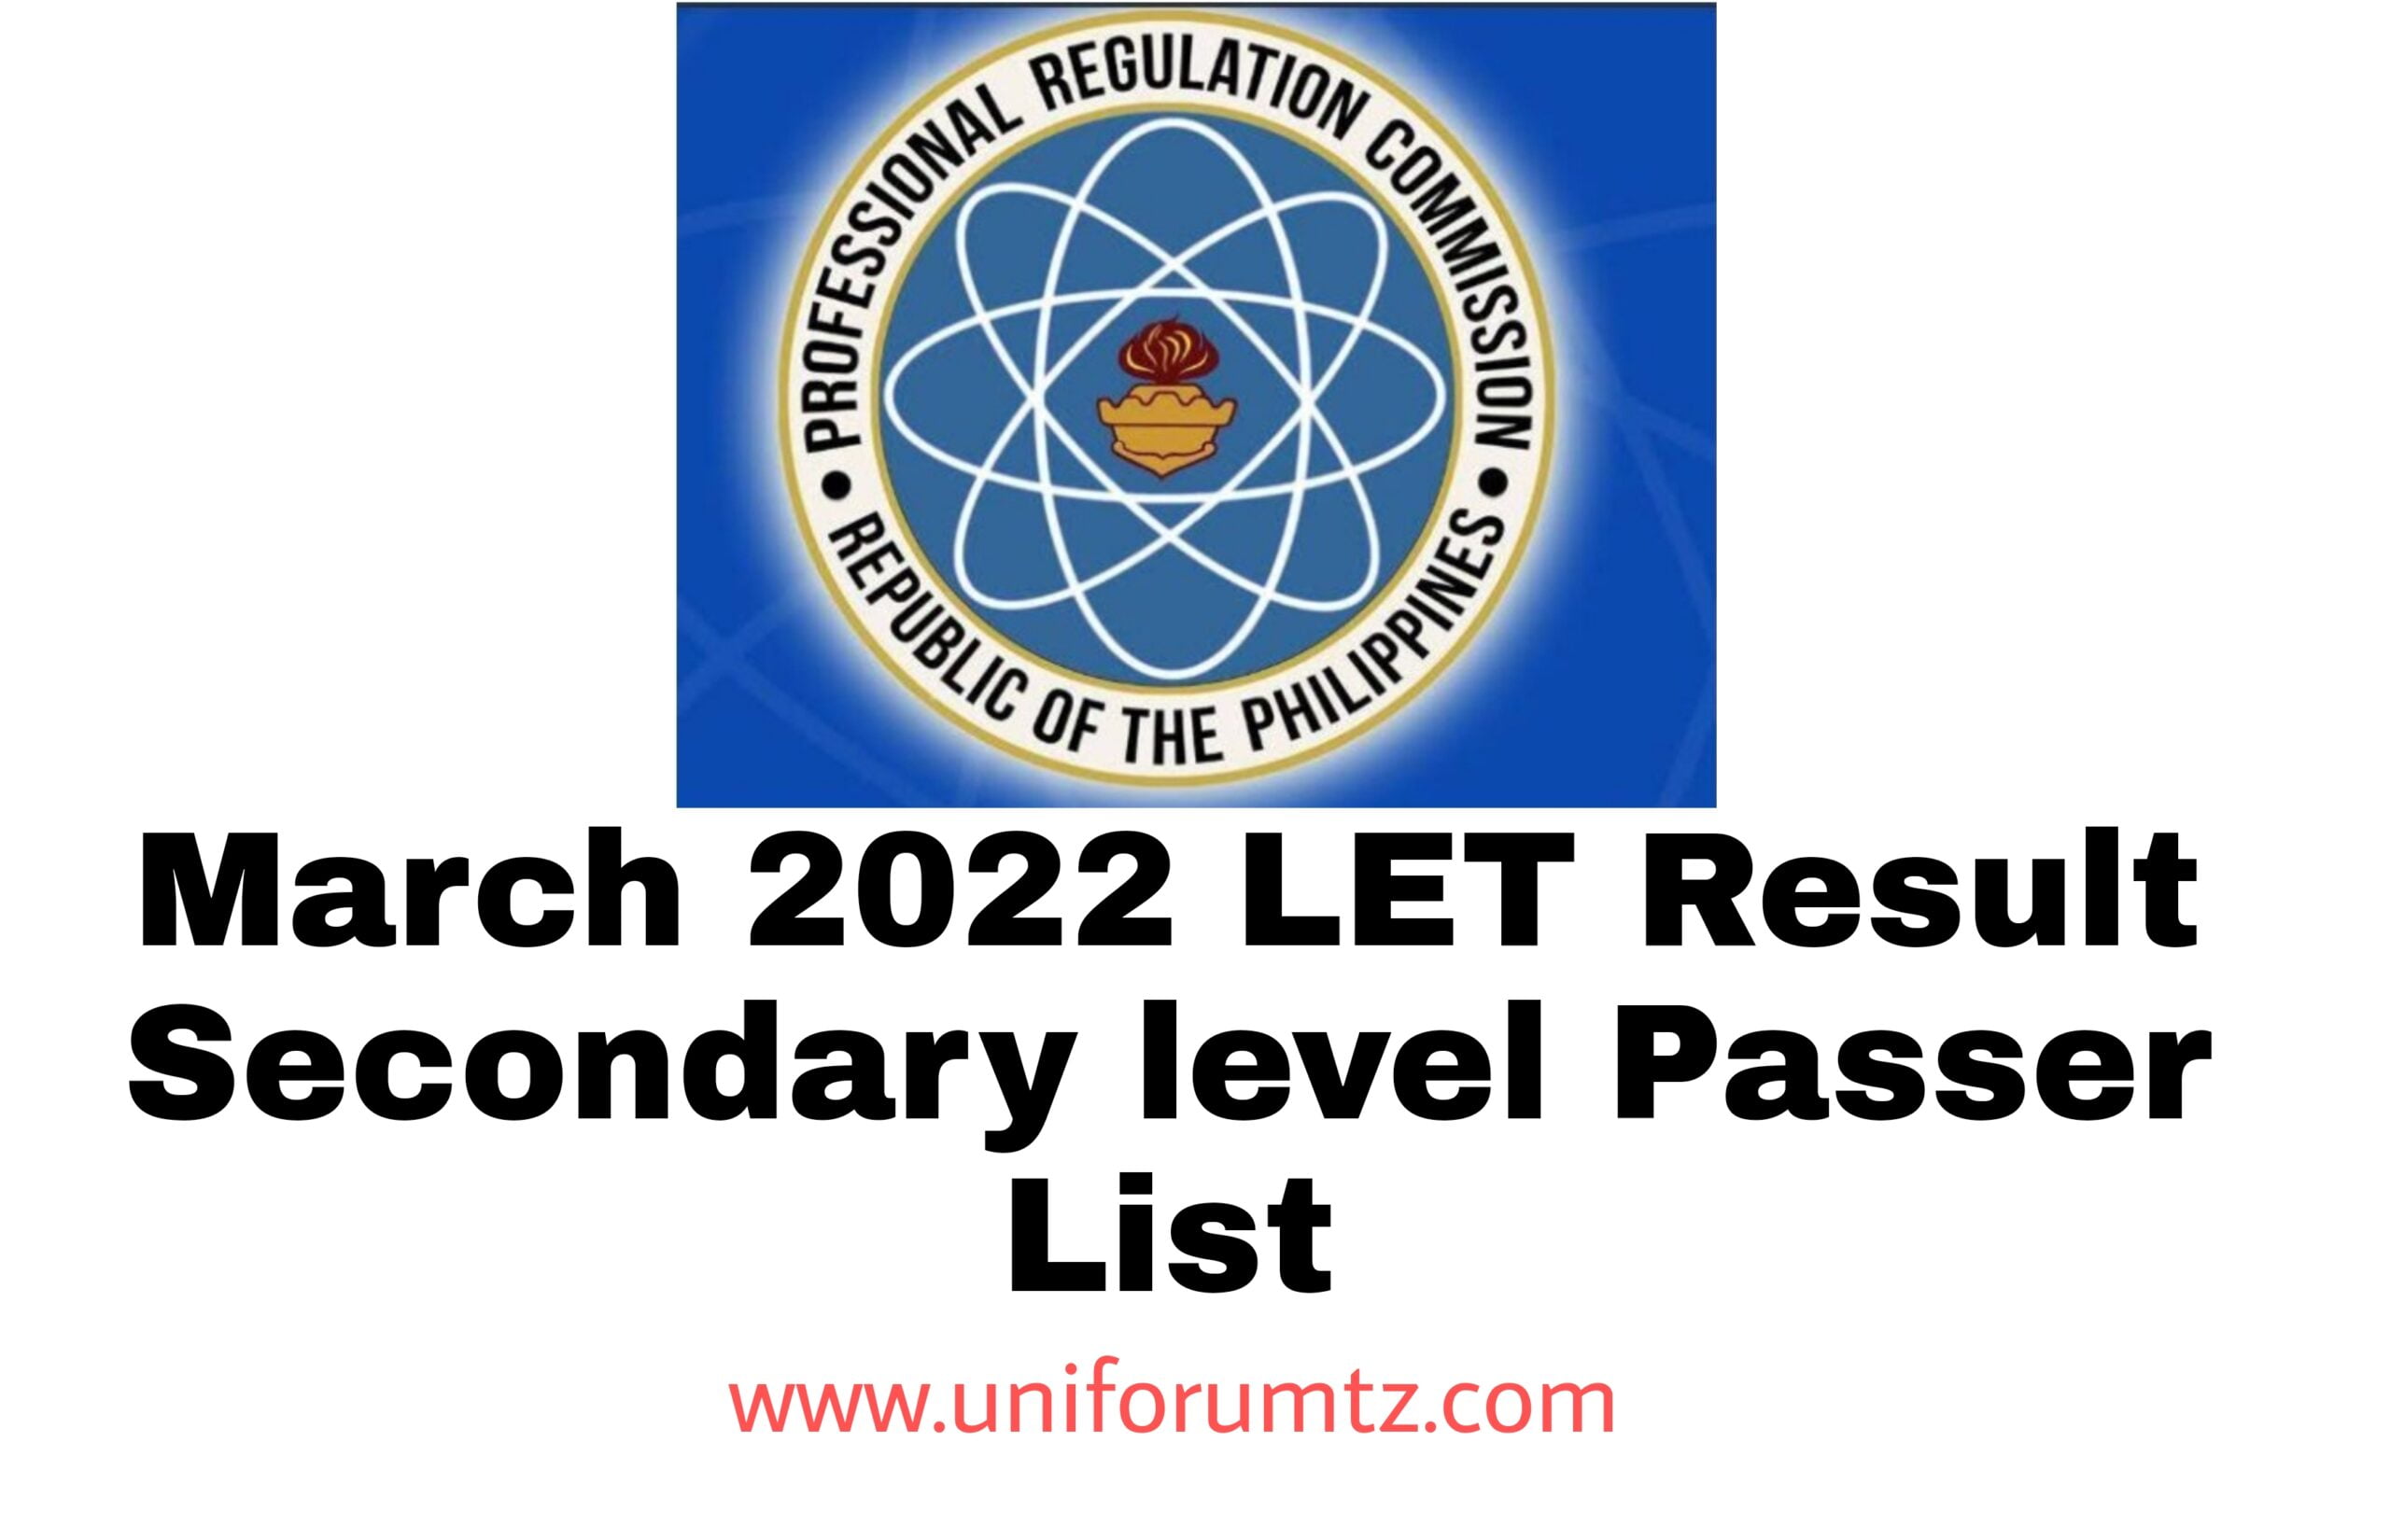 March 2022 LET Result Secondary level Passer List 